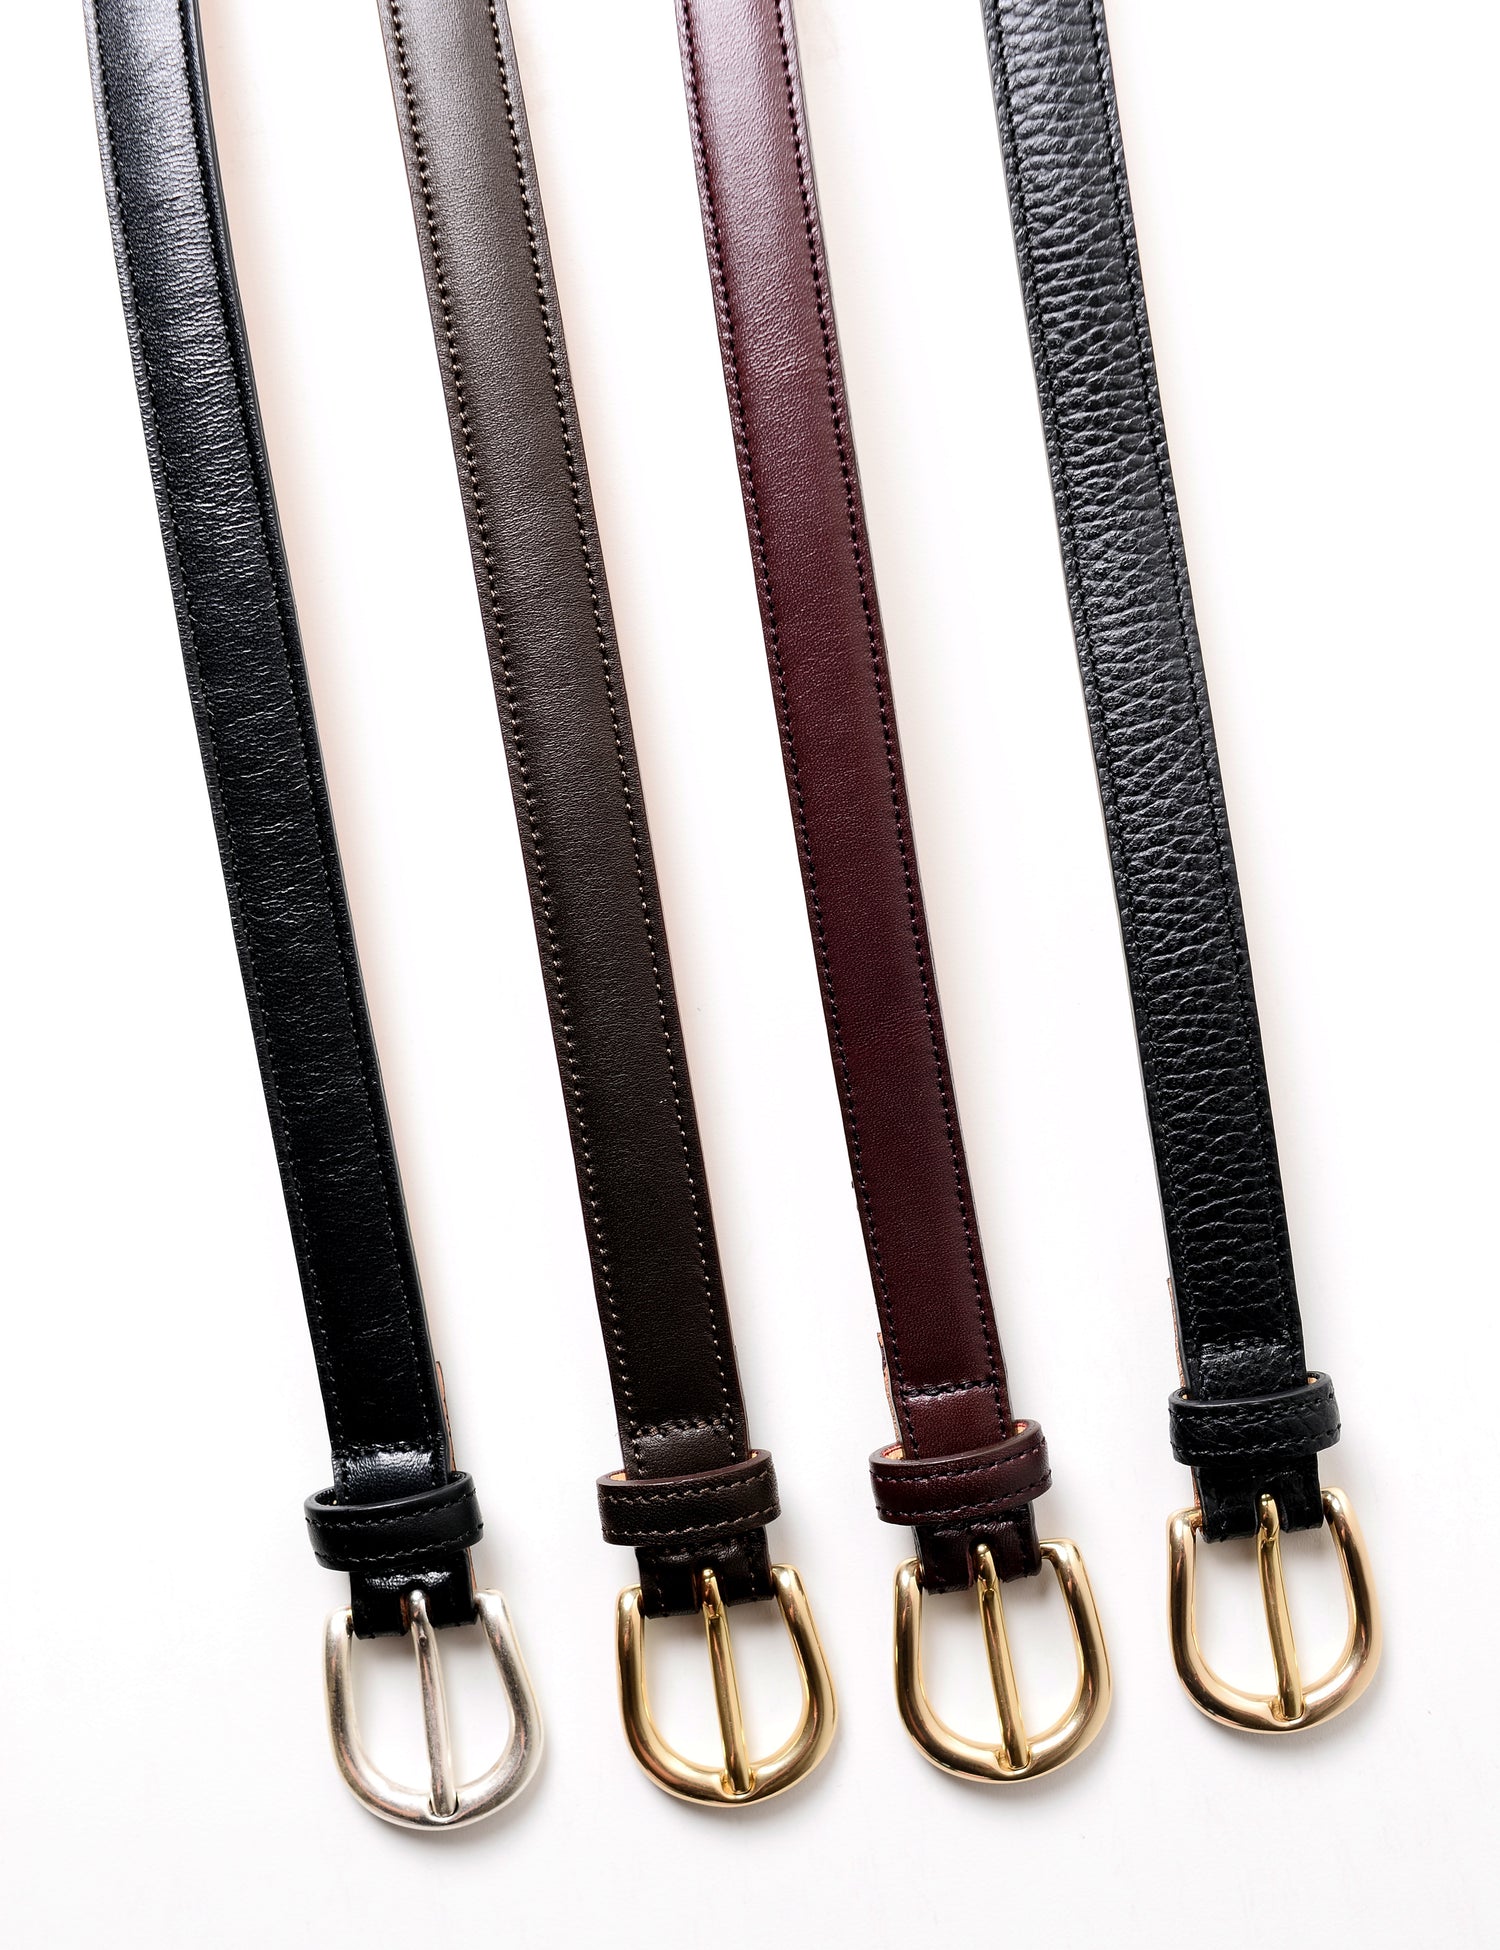 Close-up flat shot of all four styles of the Brooklyn Tailors x Saddler's 20mm belts showing the different colors, leather grains, and buckles